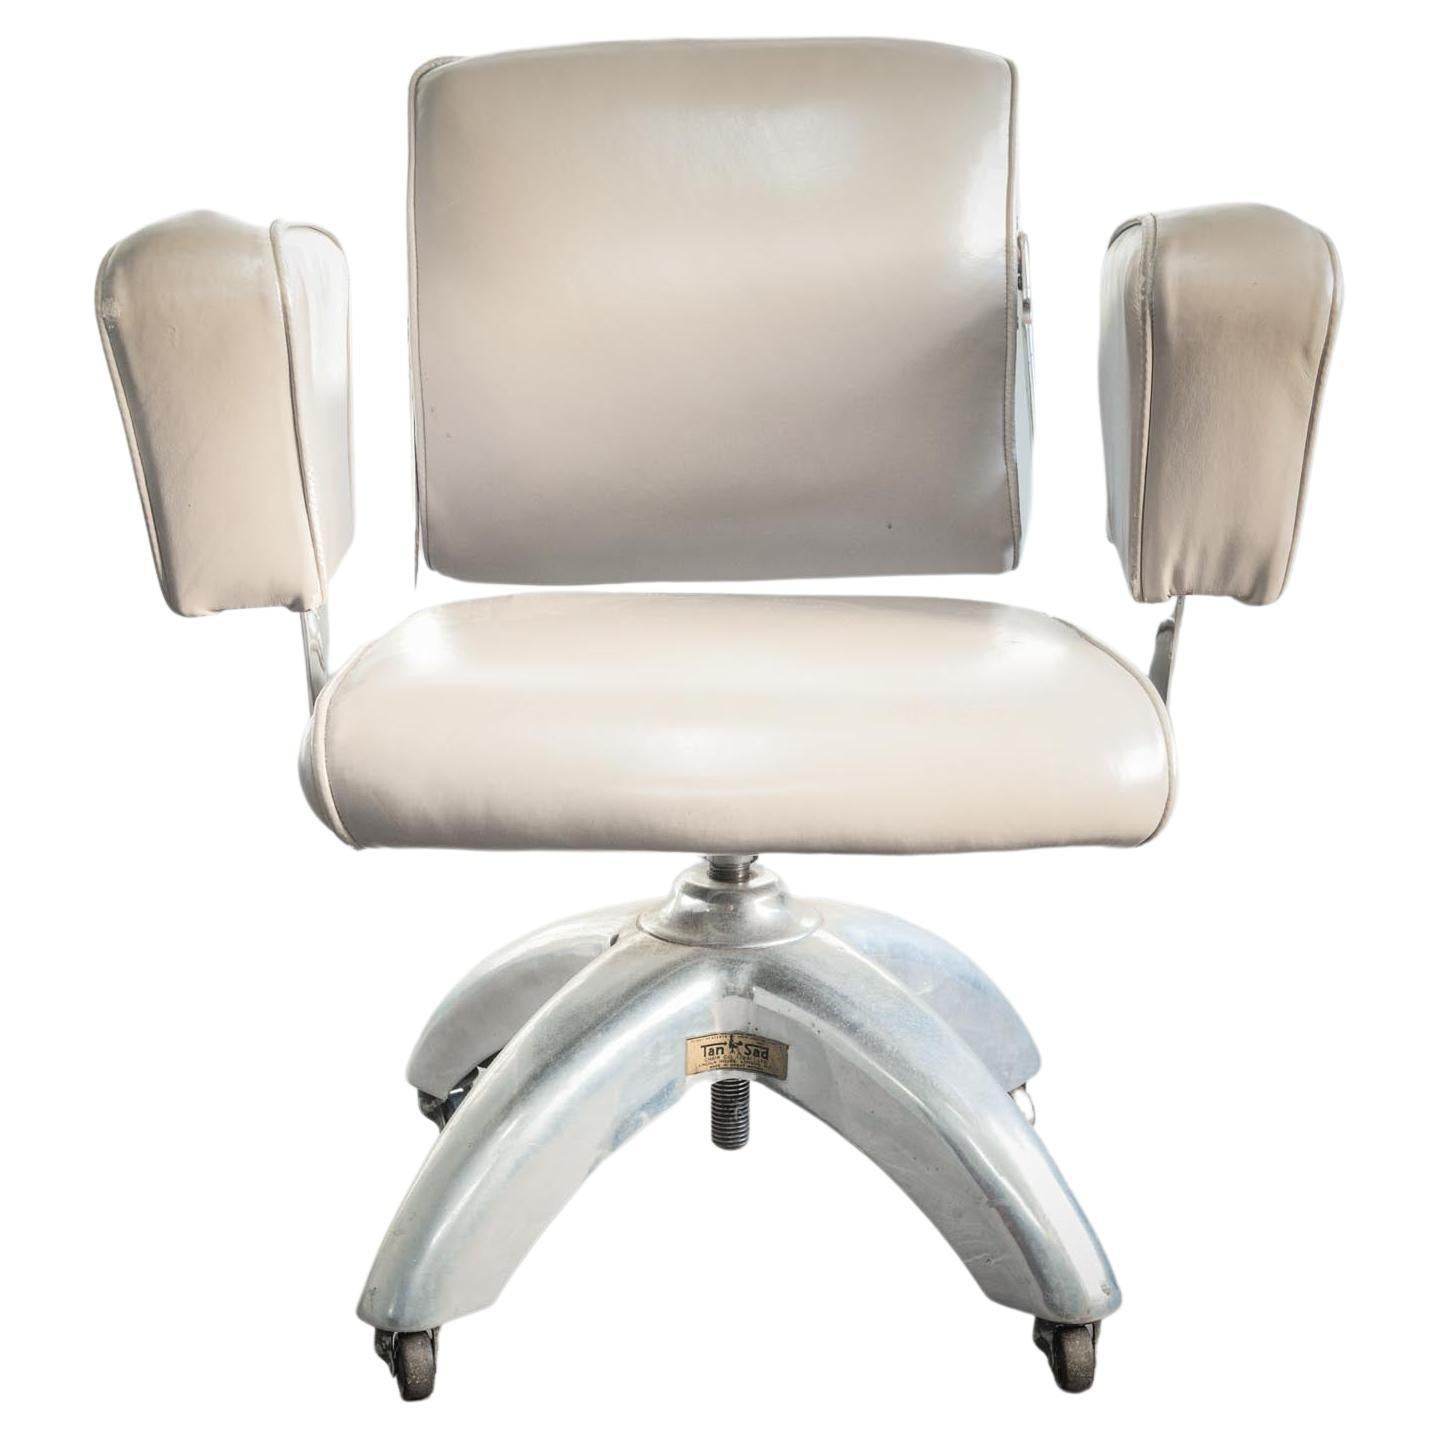 A beautiful desk chair by Tansad. This Mid century circa 1950 model is the De Luxe V.26 swivel office chair with chrome and grey leather upholstery. Extremely comfortable and stylish. With polished aluminium frame and removable arms. Height